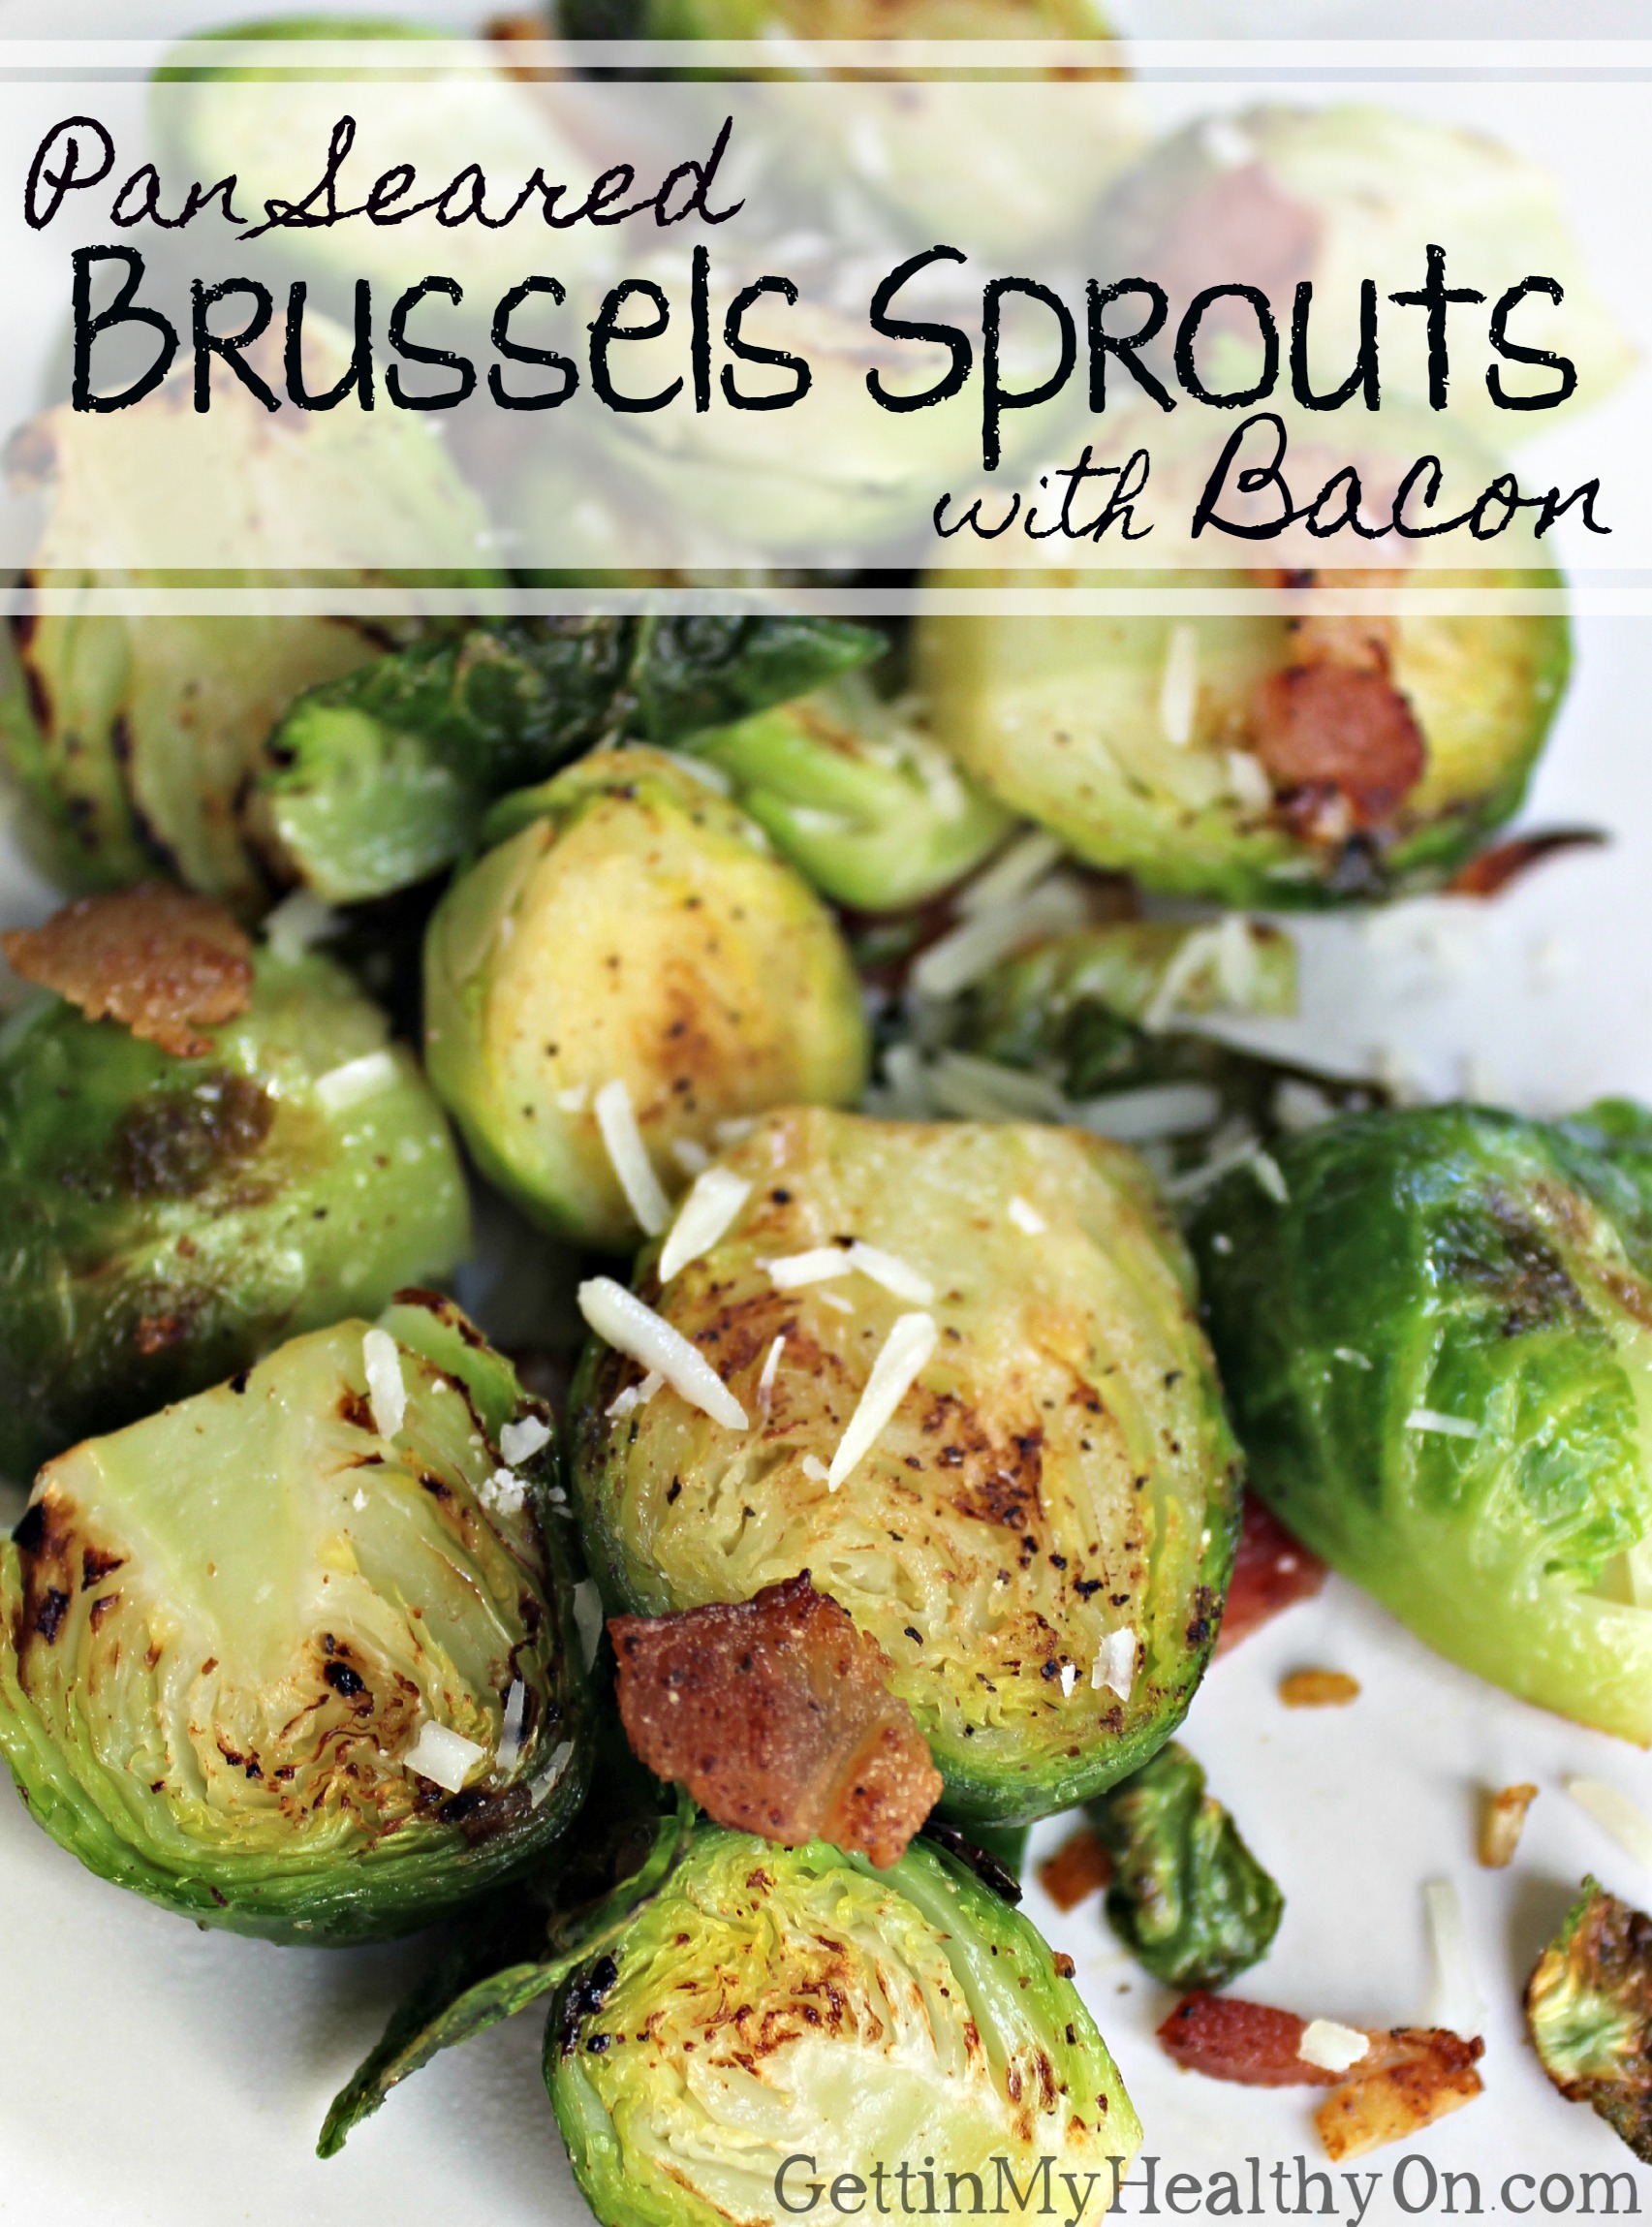 Pan Seared Brussels Sprouts with Bacon